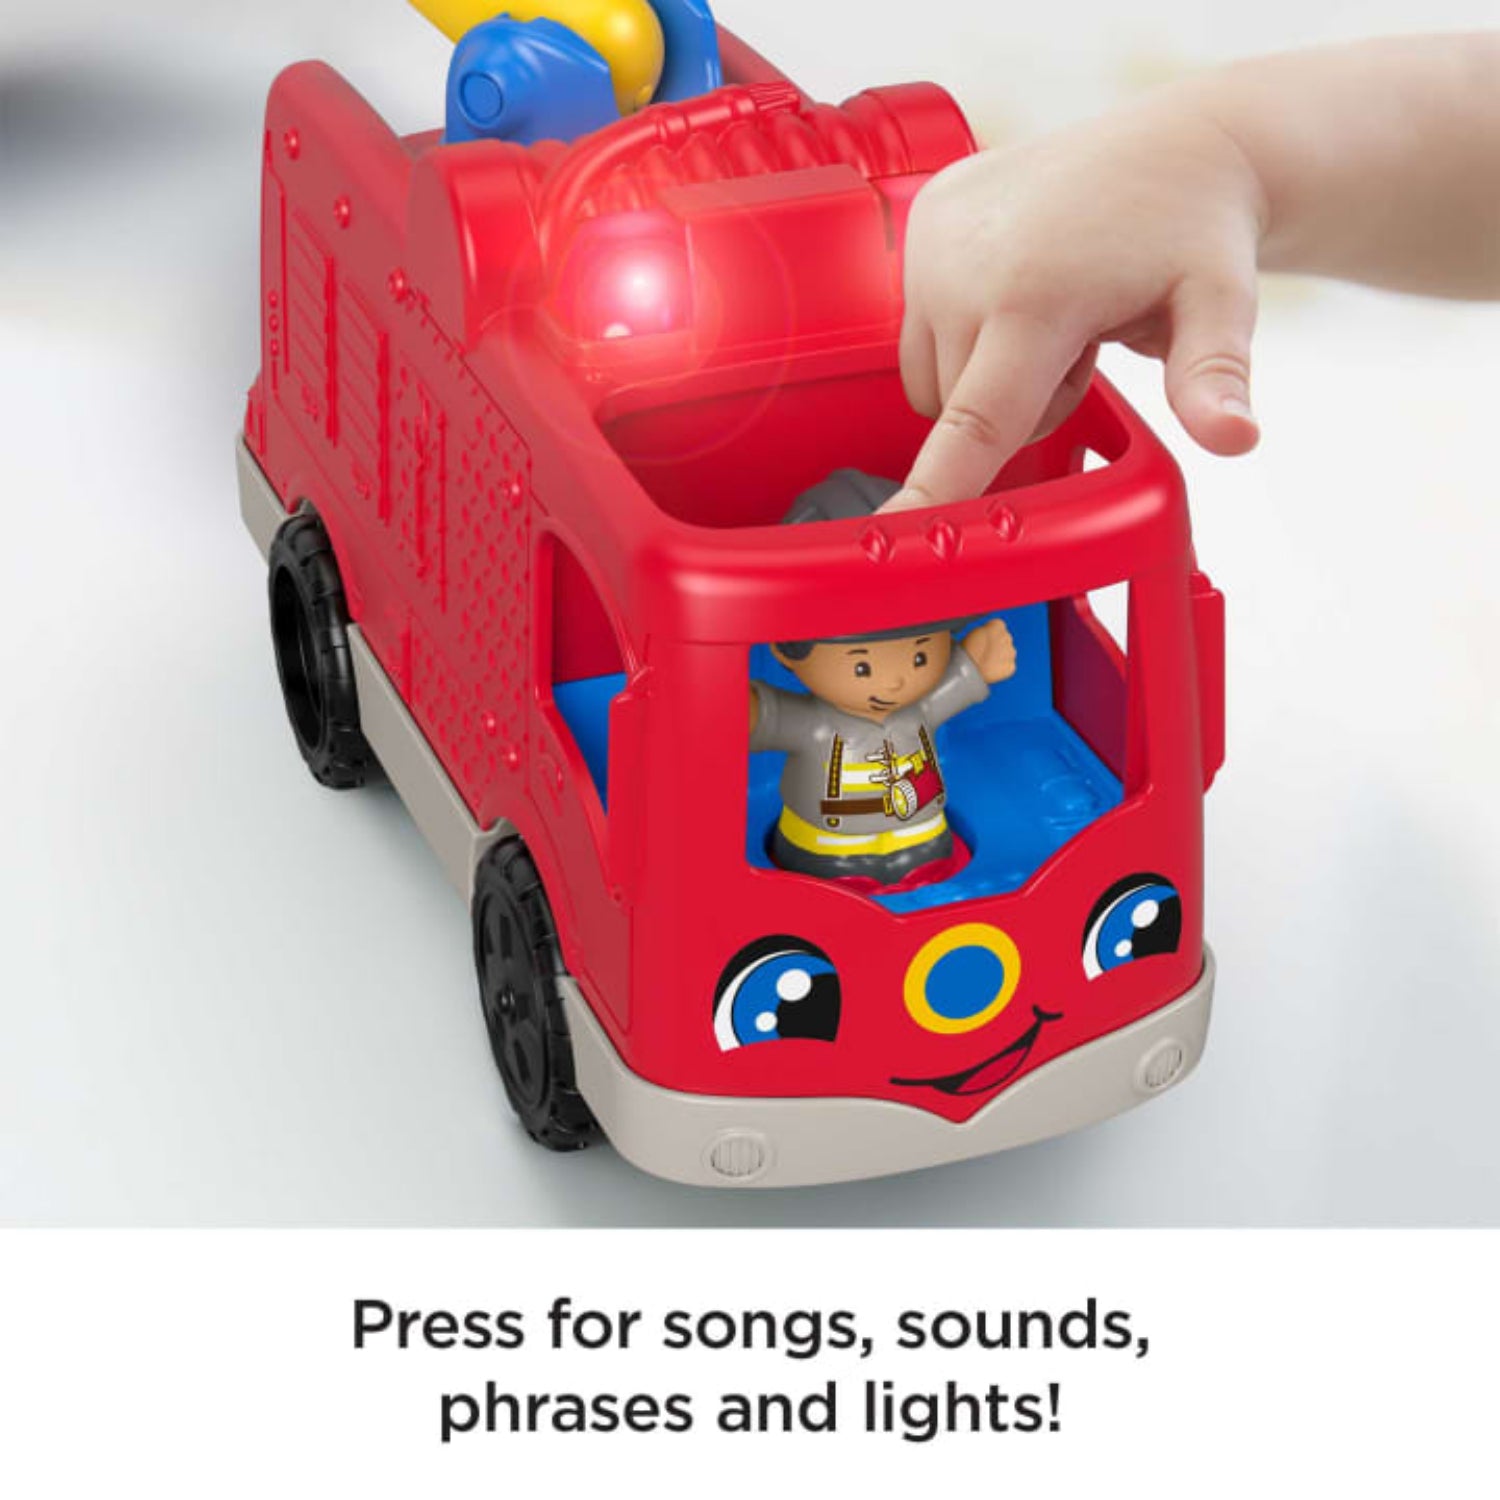 Fisher-Price Little People Fire Truck Toy with Lights and Sounds, 2 Firefighter Figures